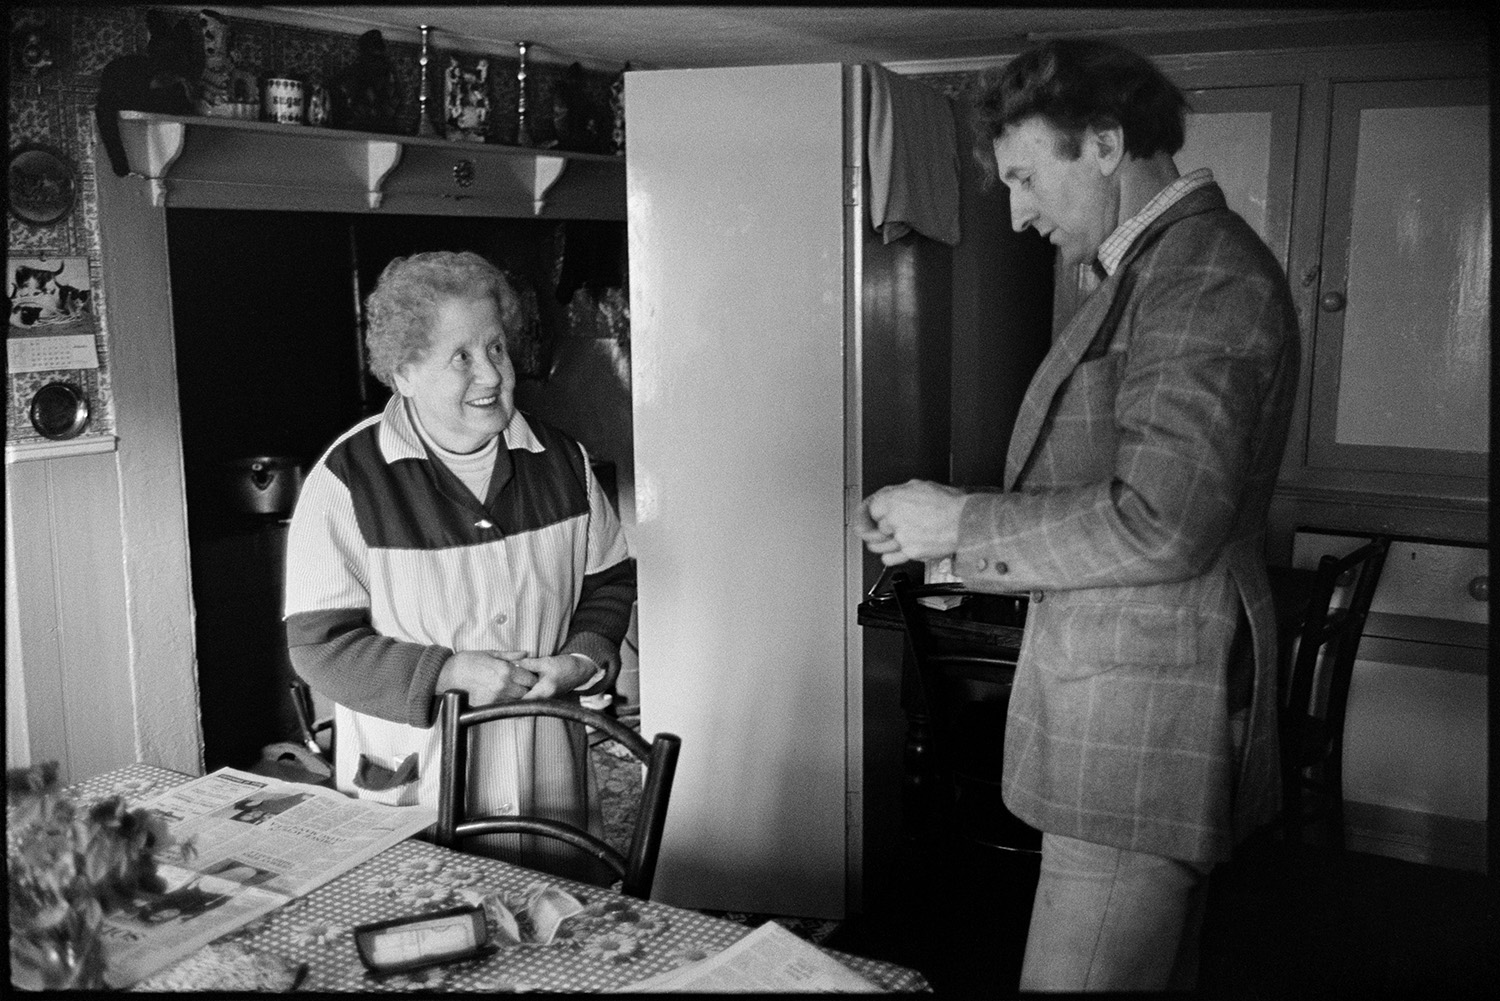 Milkman on last round chatting to customers, settling bills. Front of Post Office. 
[Ivor Bourne talking to a woman in her kitchen in Beaford after delivering her milk on his last milk round. Vases and candlestick are displayed on the mantelpiece in the background.]